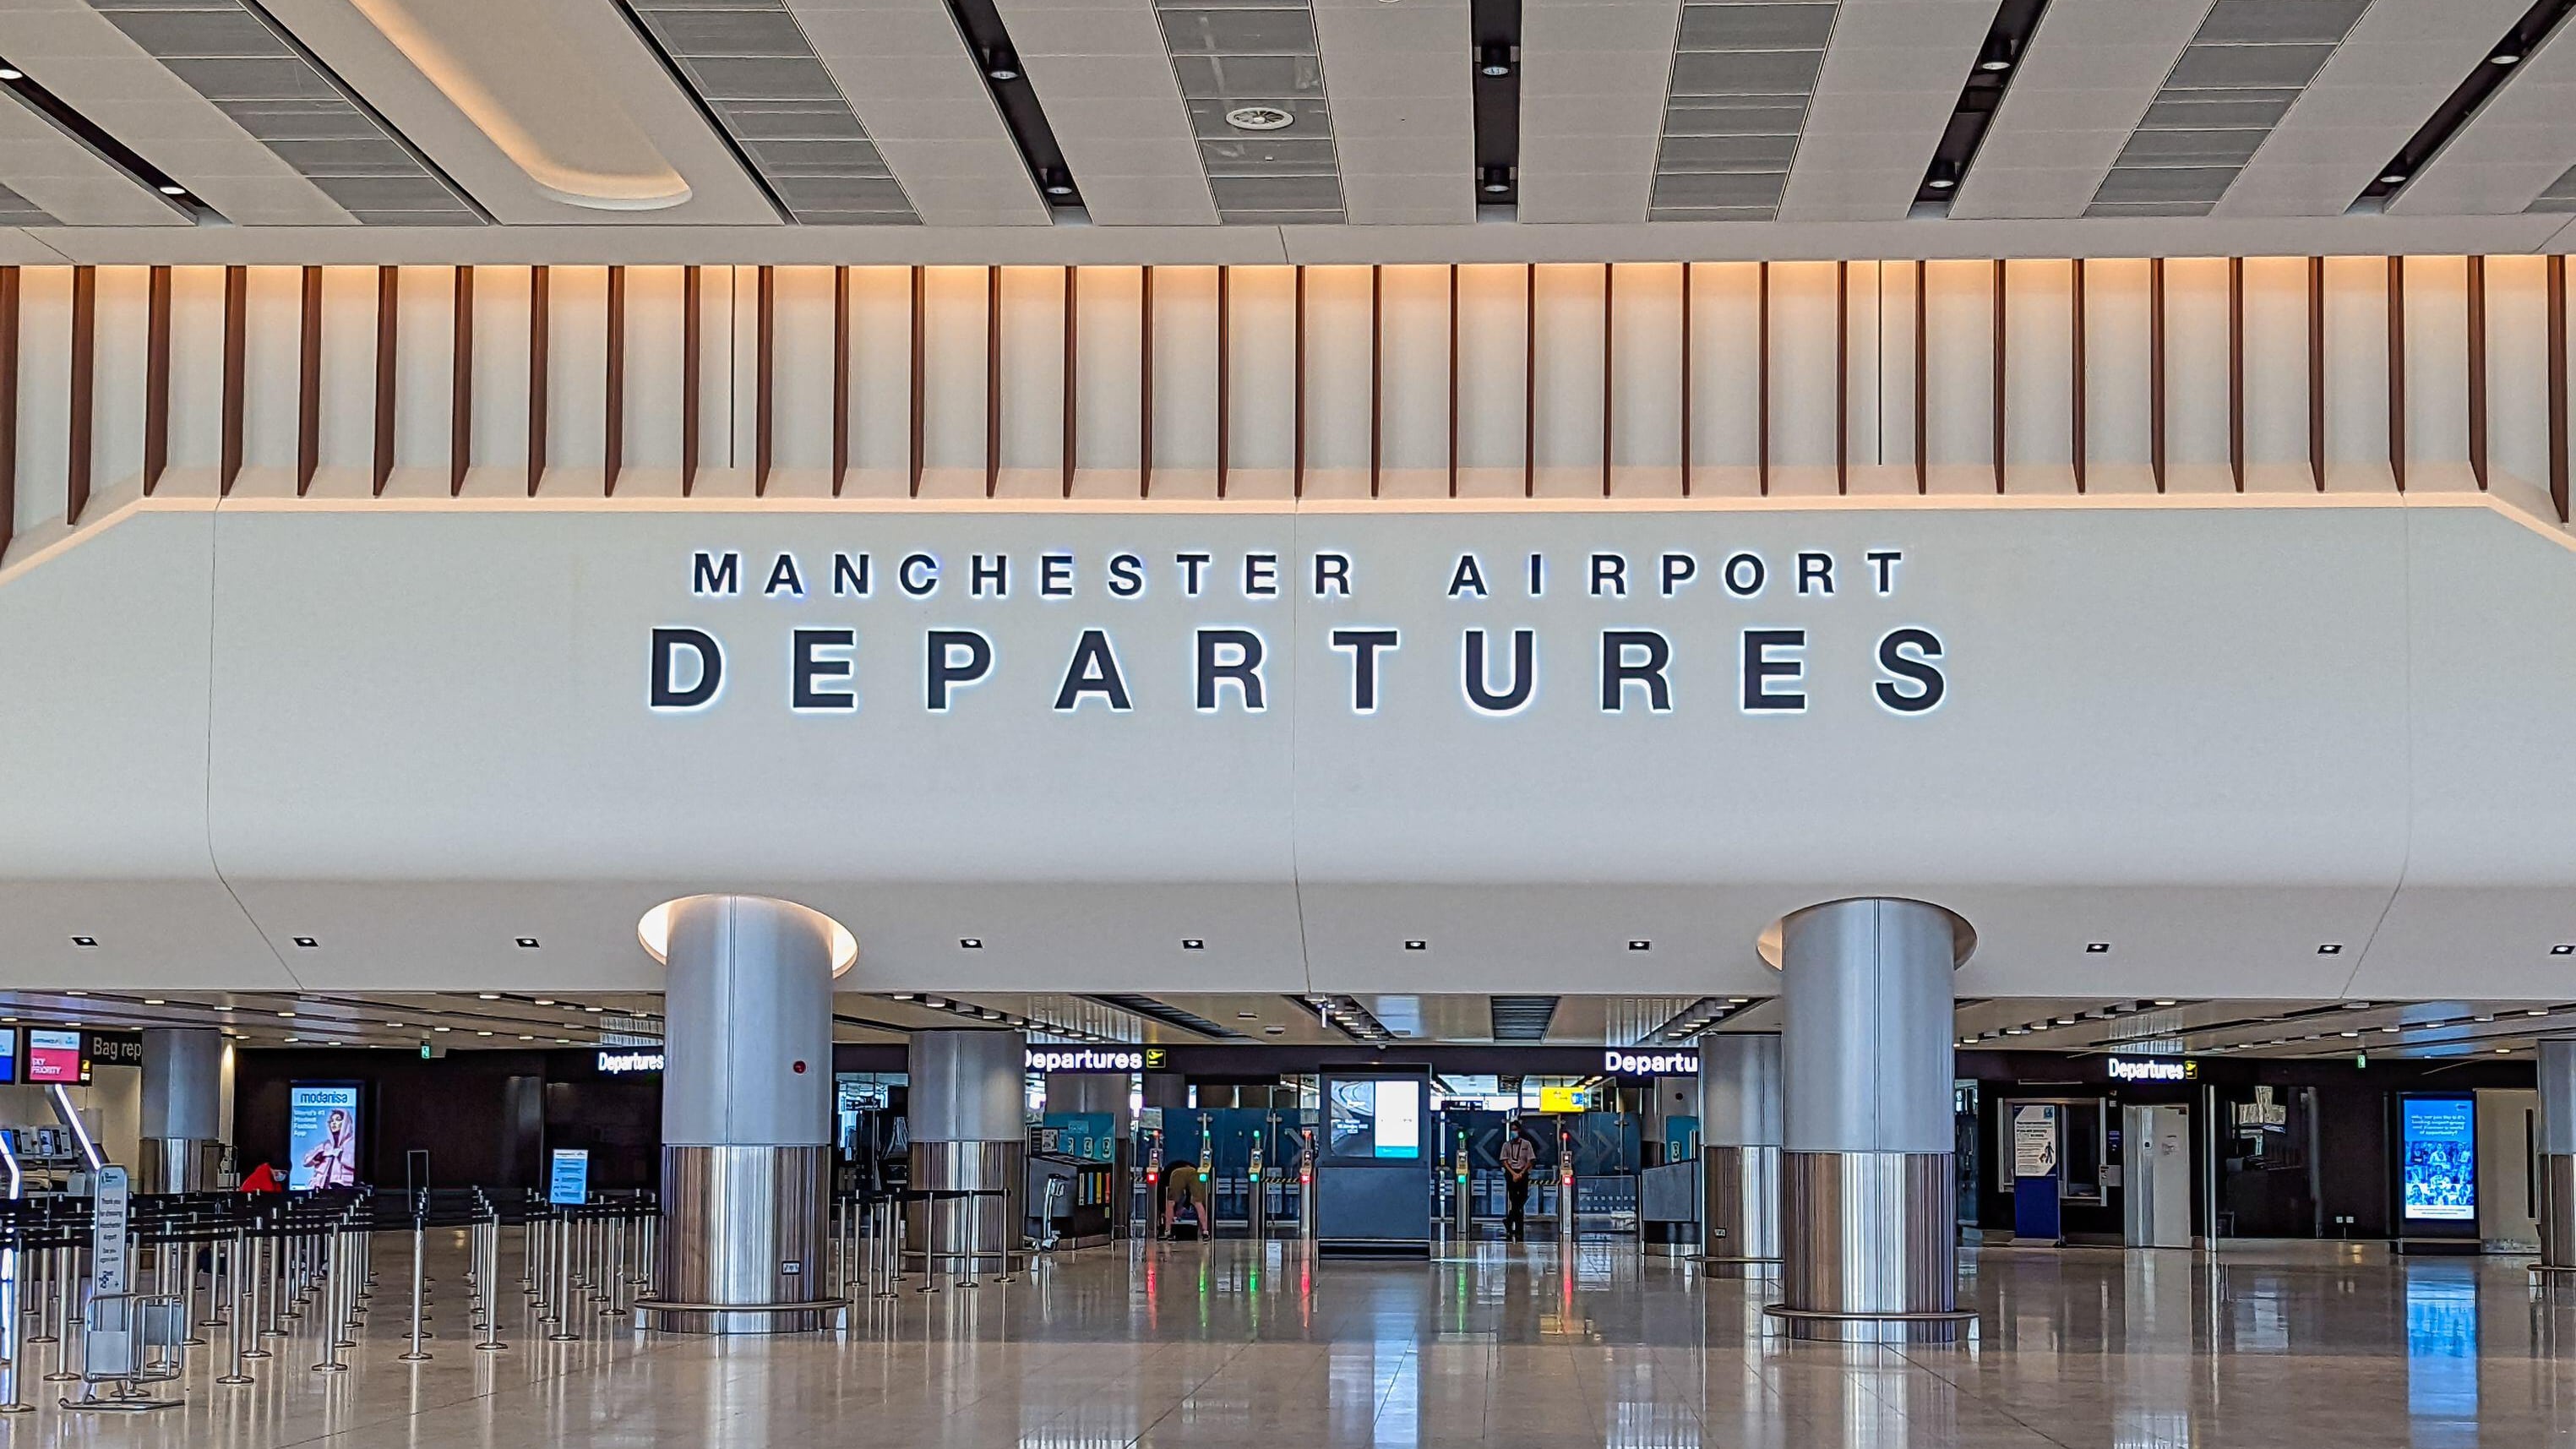 Manchester Airport’s managing director has apologised for disruption caused after a power cut led to many flights being cancelled